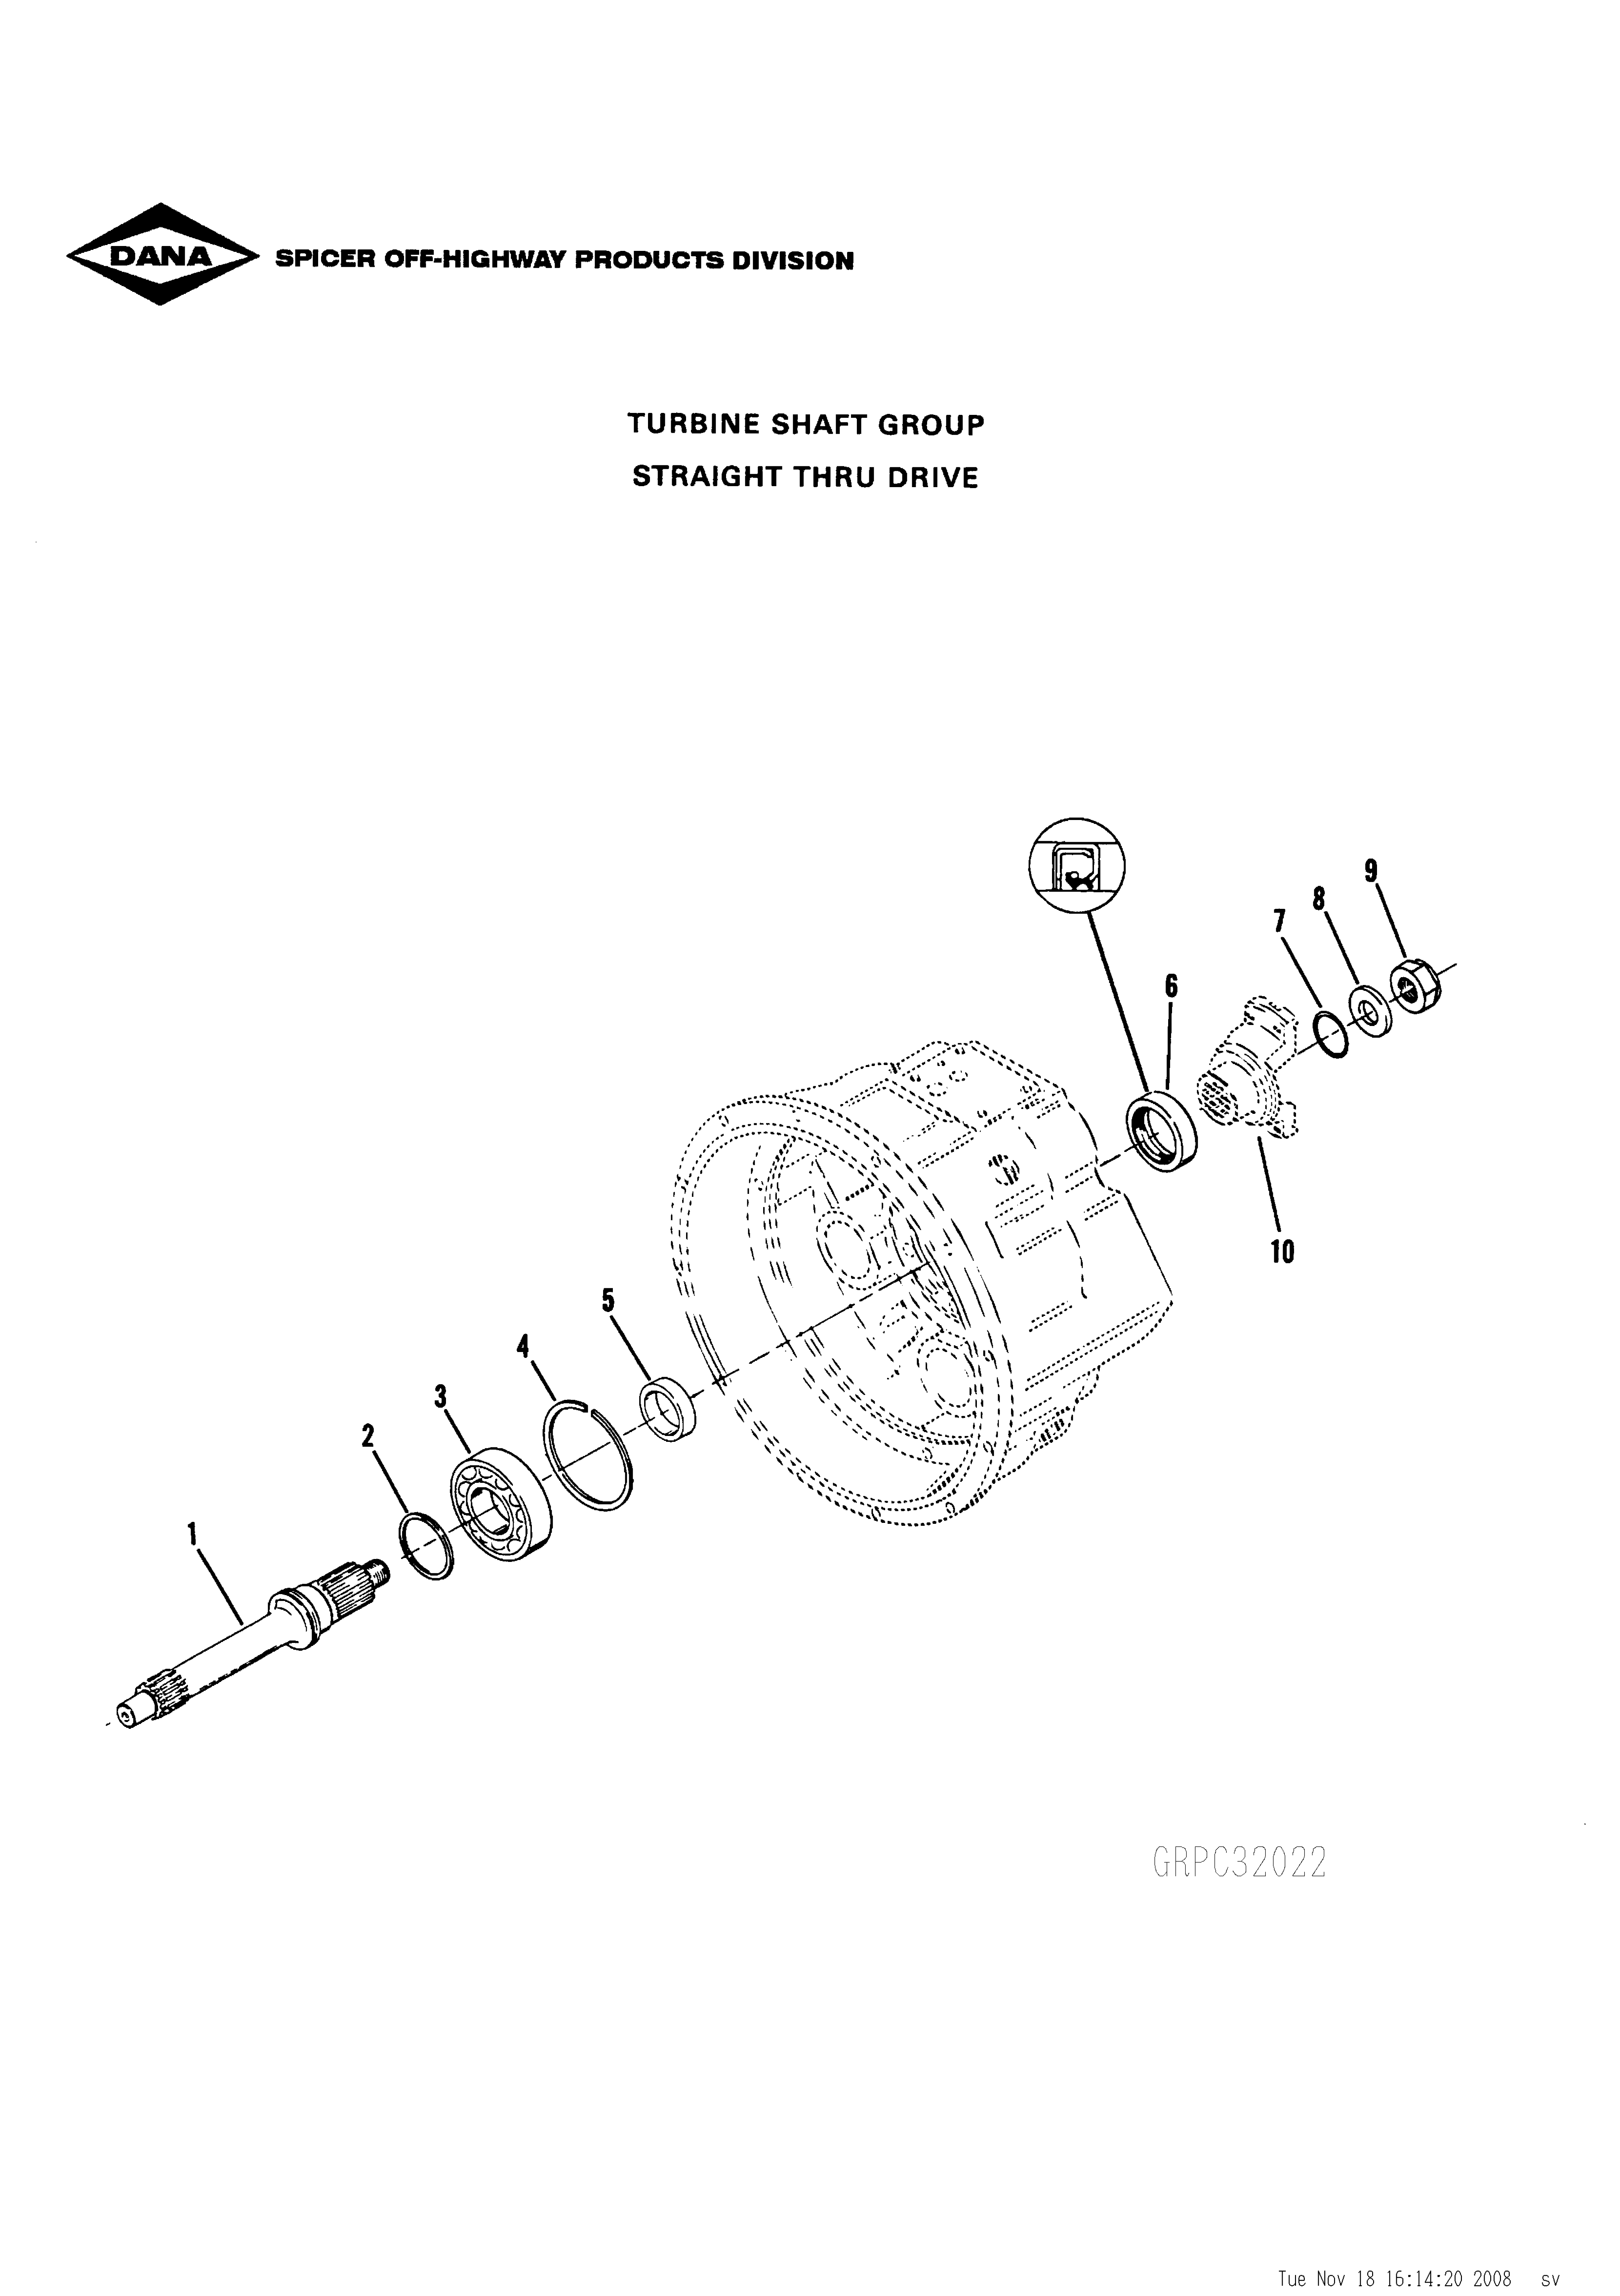 drawing for TELEDYNE SPECIALITY EQUIPMENT 1004555 - OIL SEAL (figure 4)